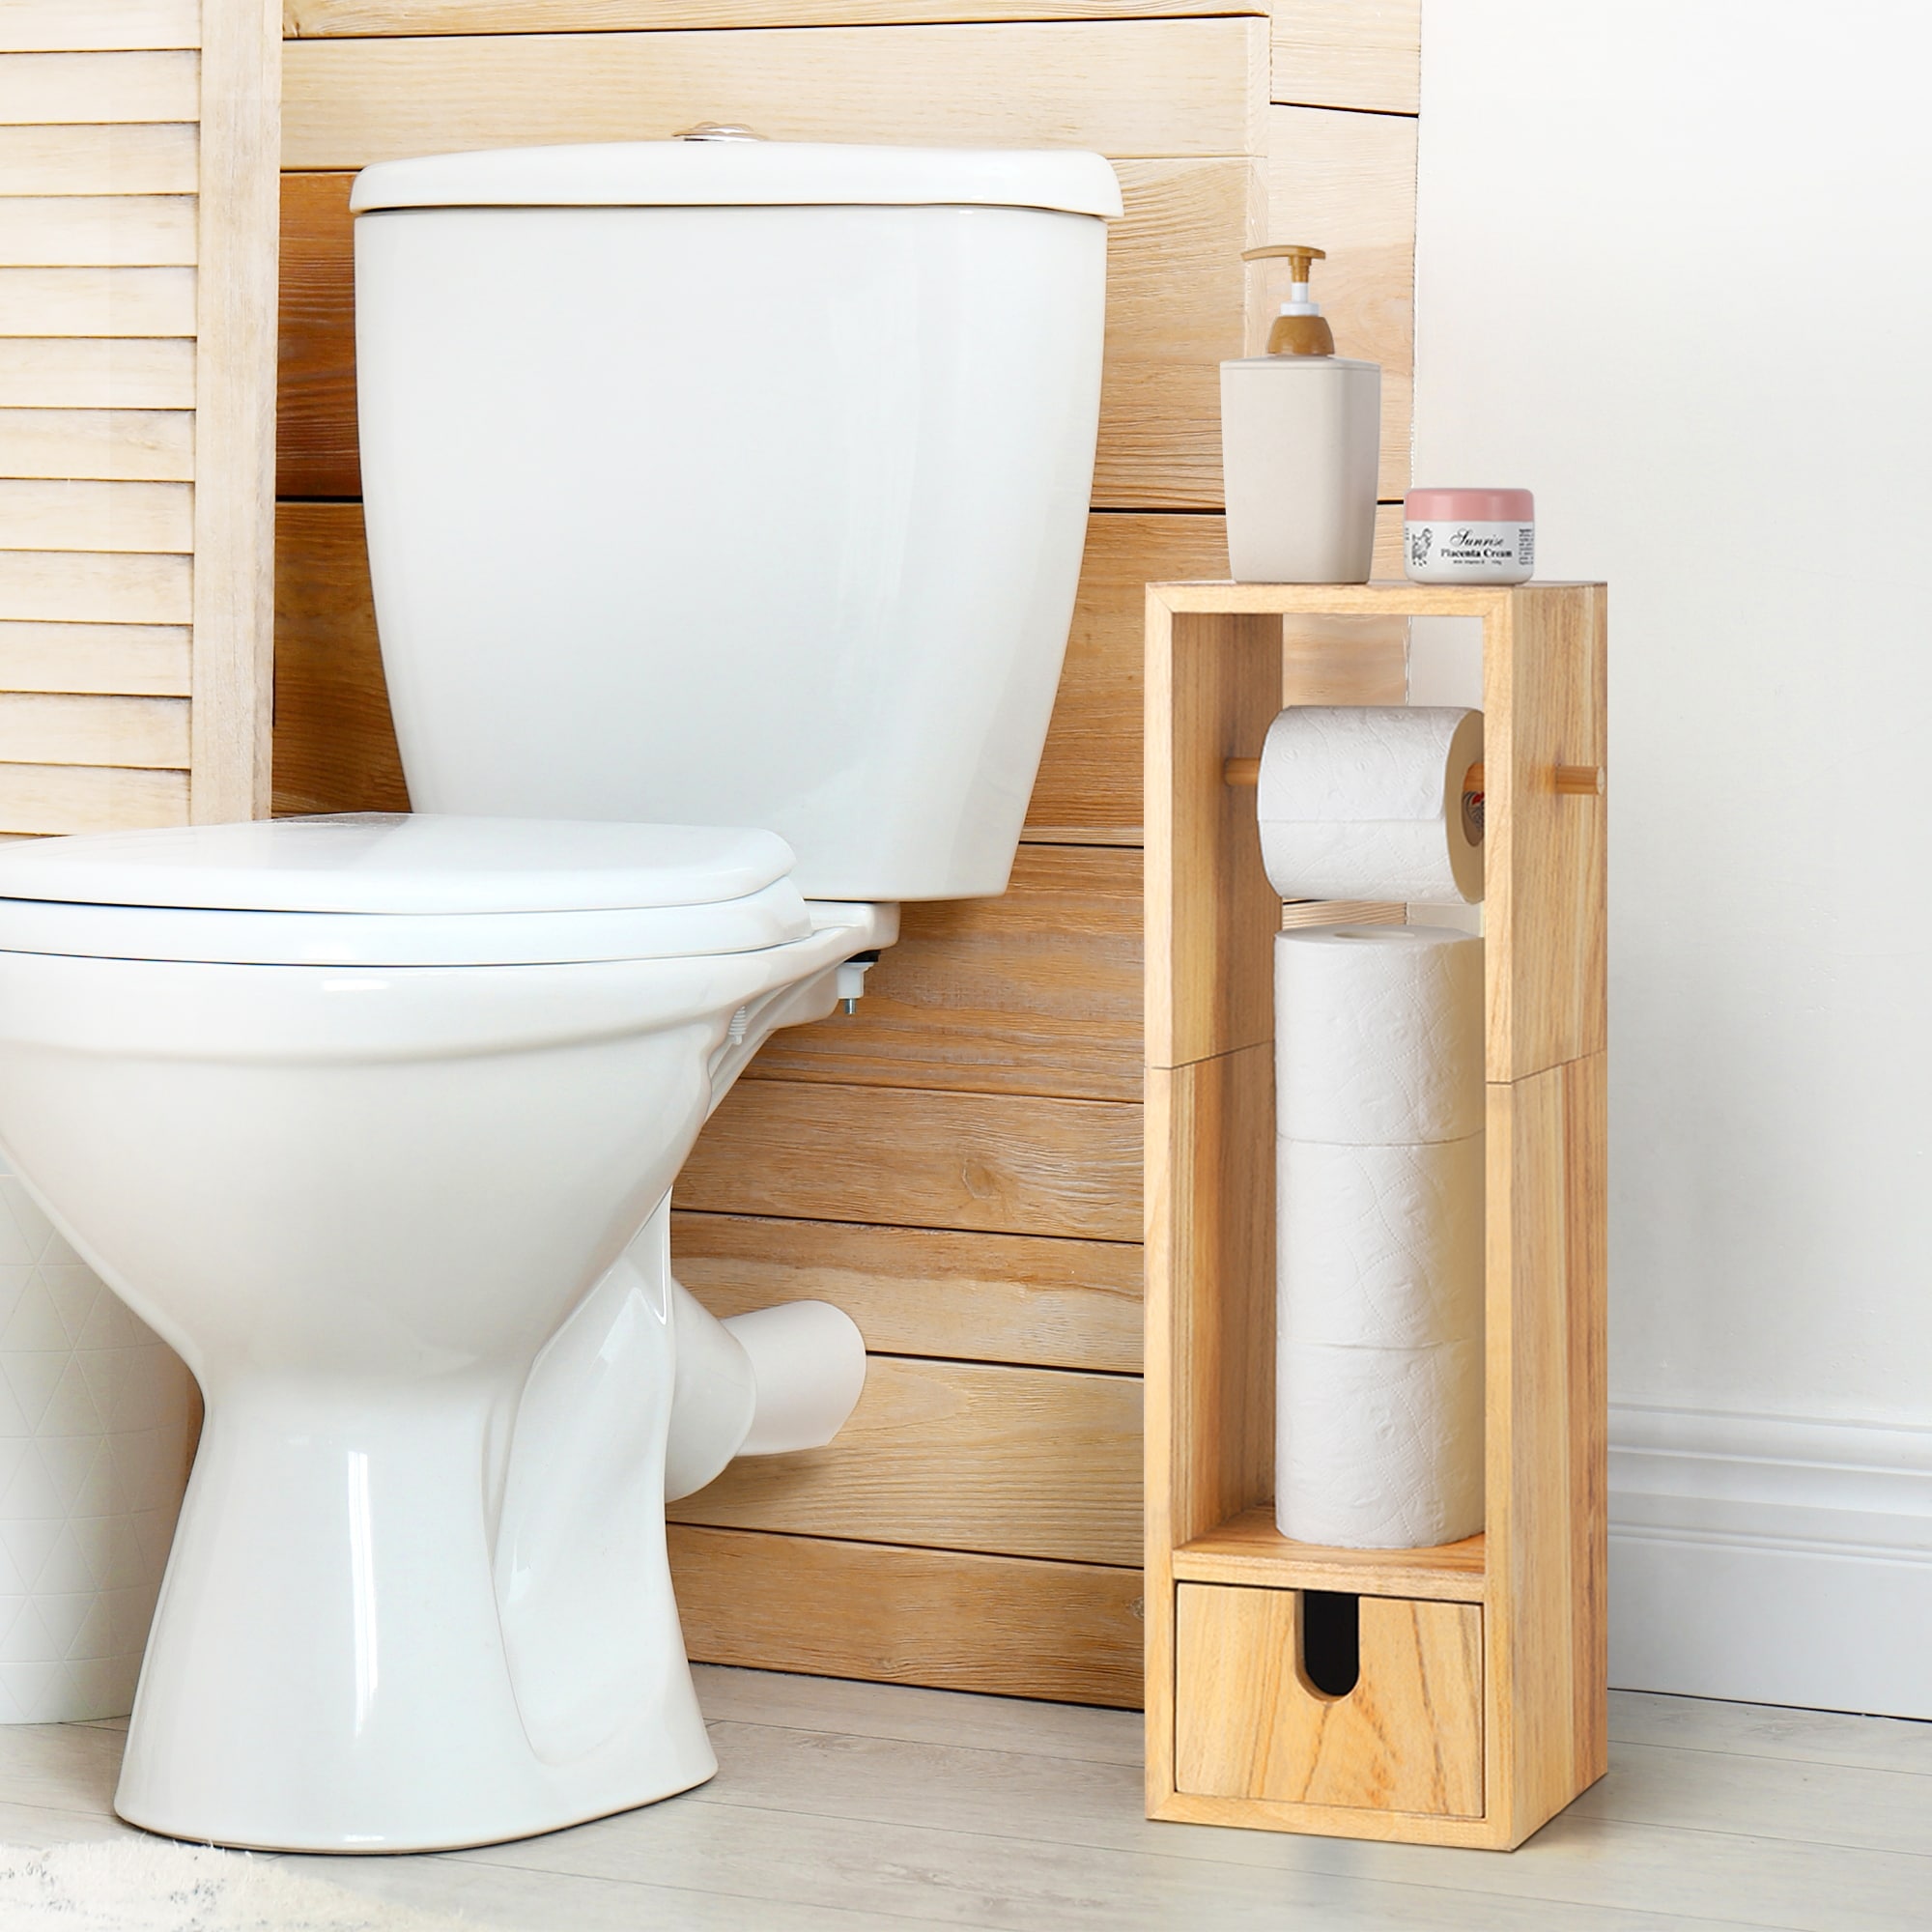 https://ak1.ostkcdn.com/images/products/is/images/direct/4d4ddff9e1b94f40b32dc45ef46c31e4aa7b41e9/Wood-Free-Standing-Toilet-Paper-Roll-Holder-with-Drawer.jpg